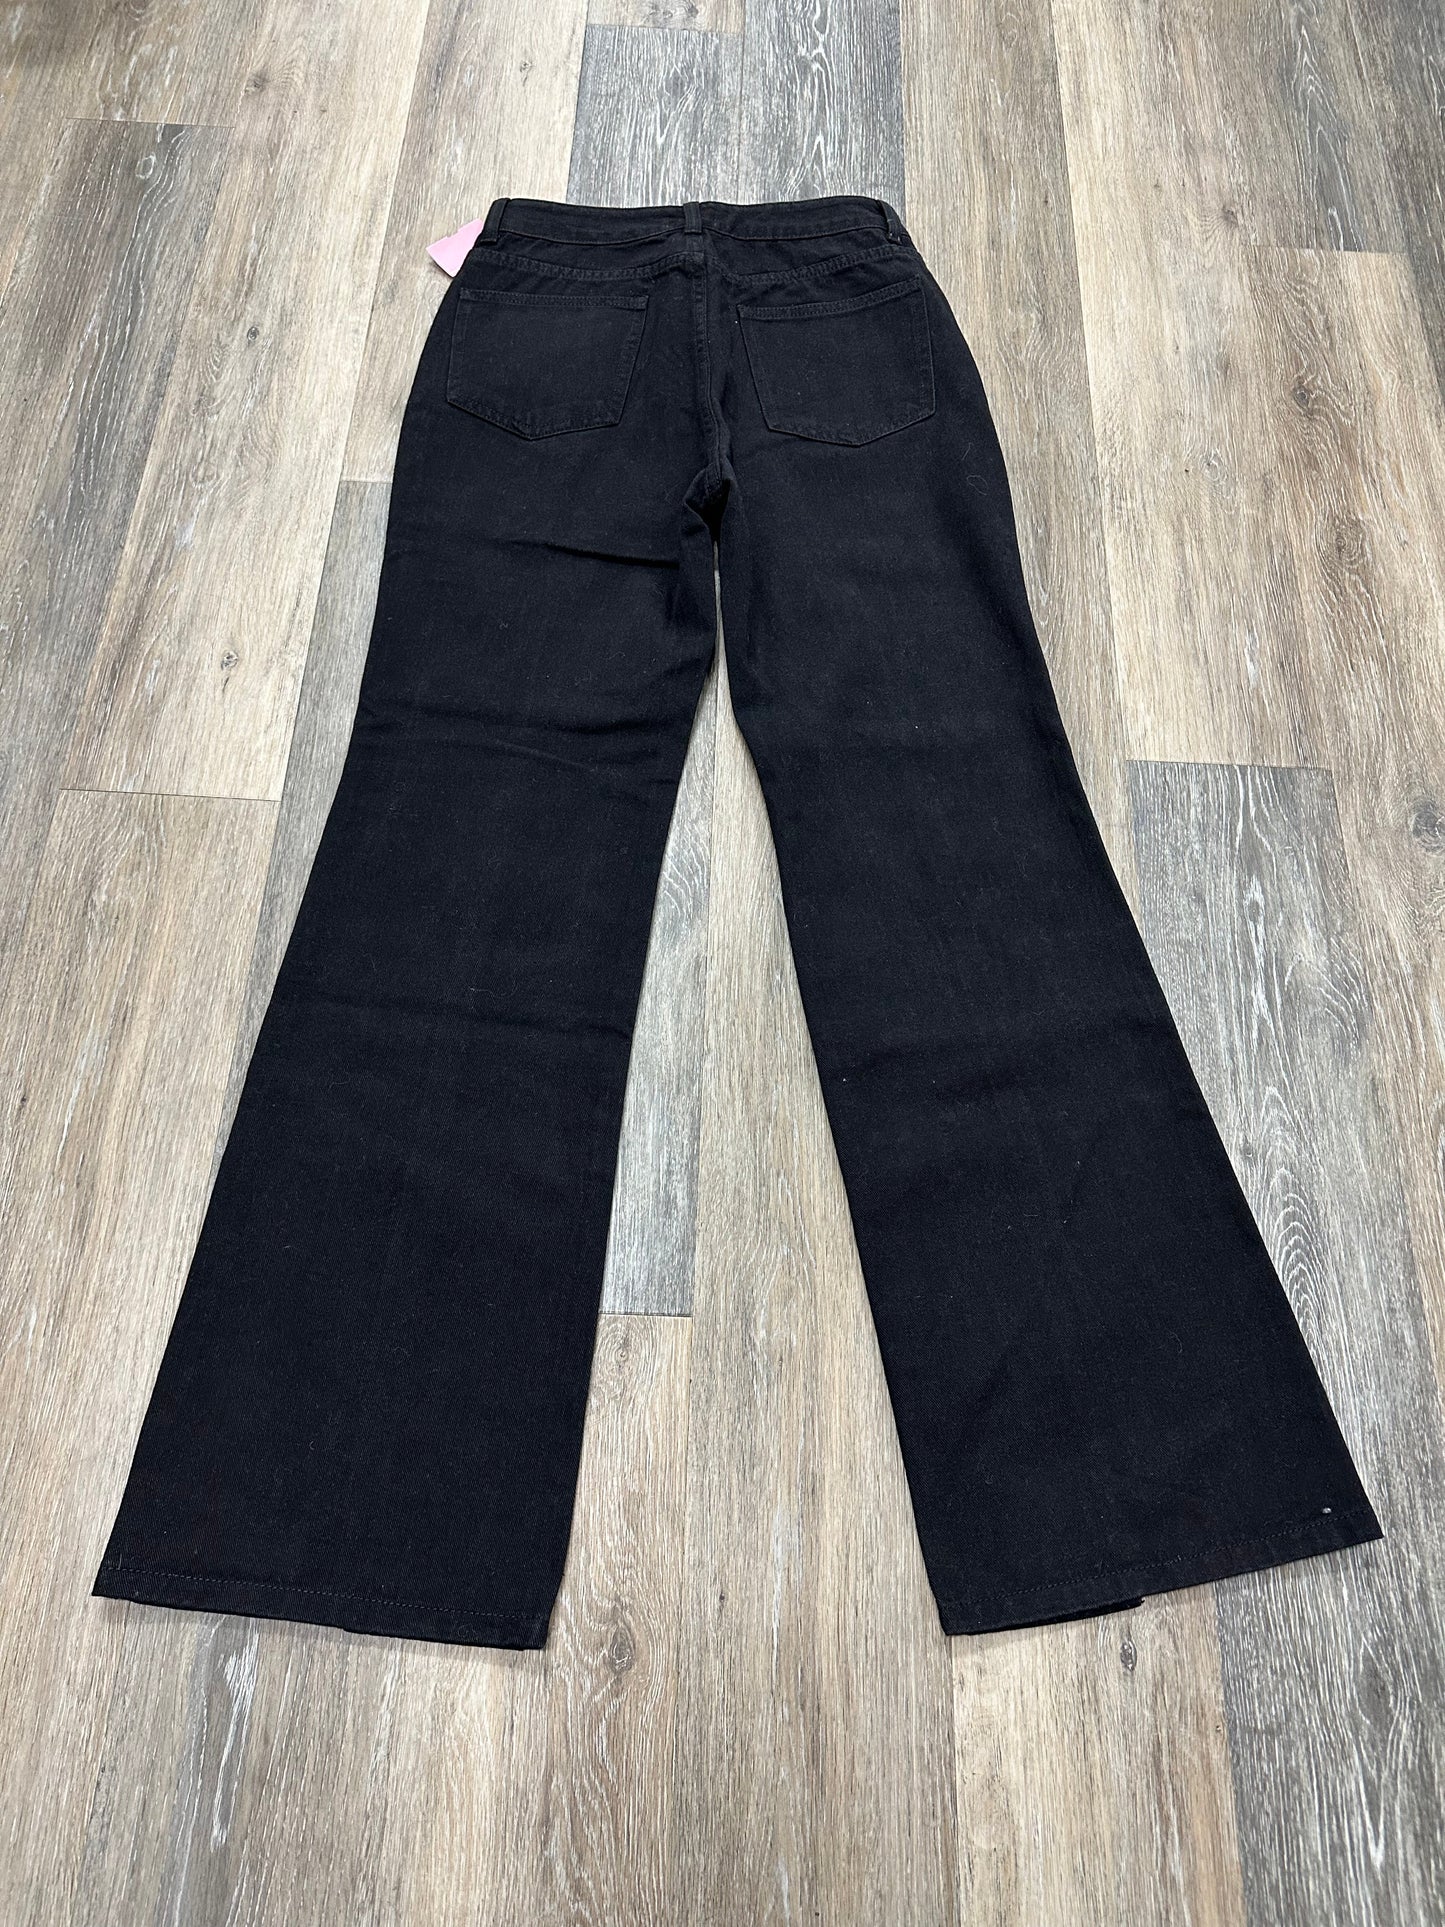 Jeans Straight By Pink Lily  Size: 6